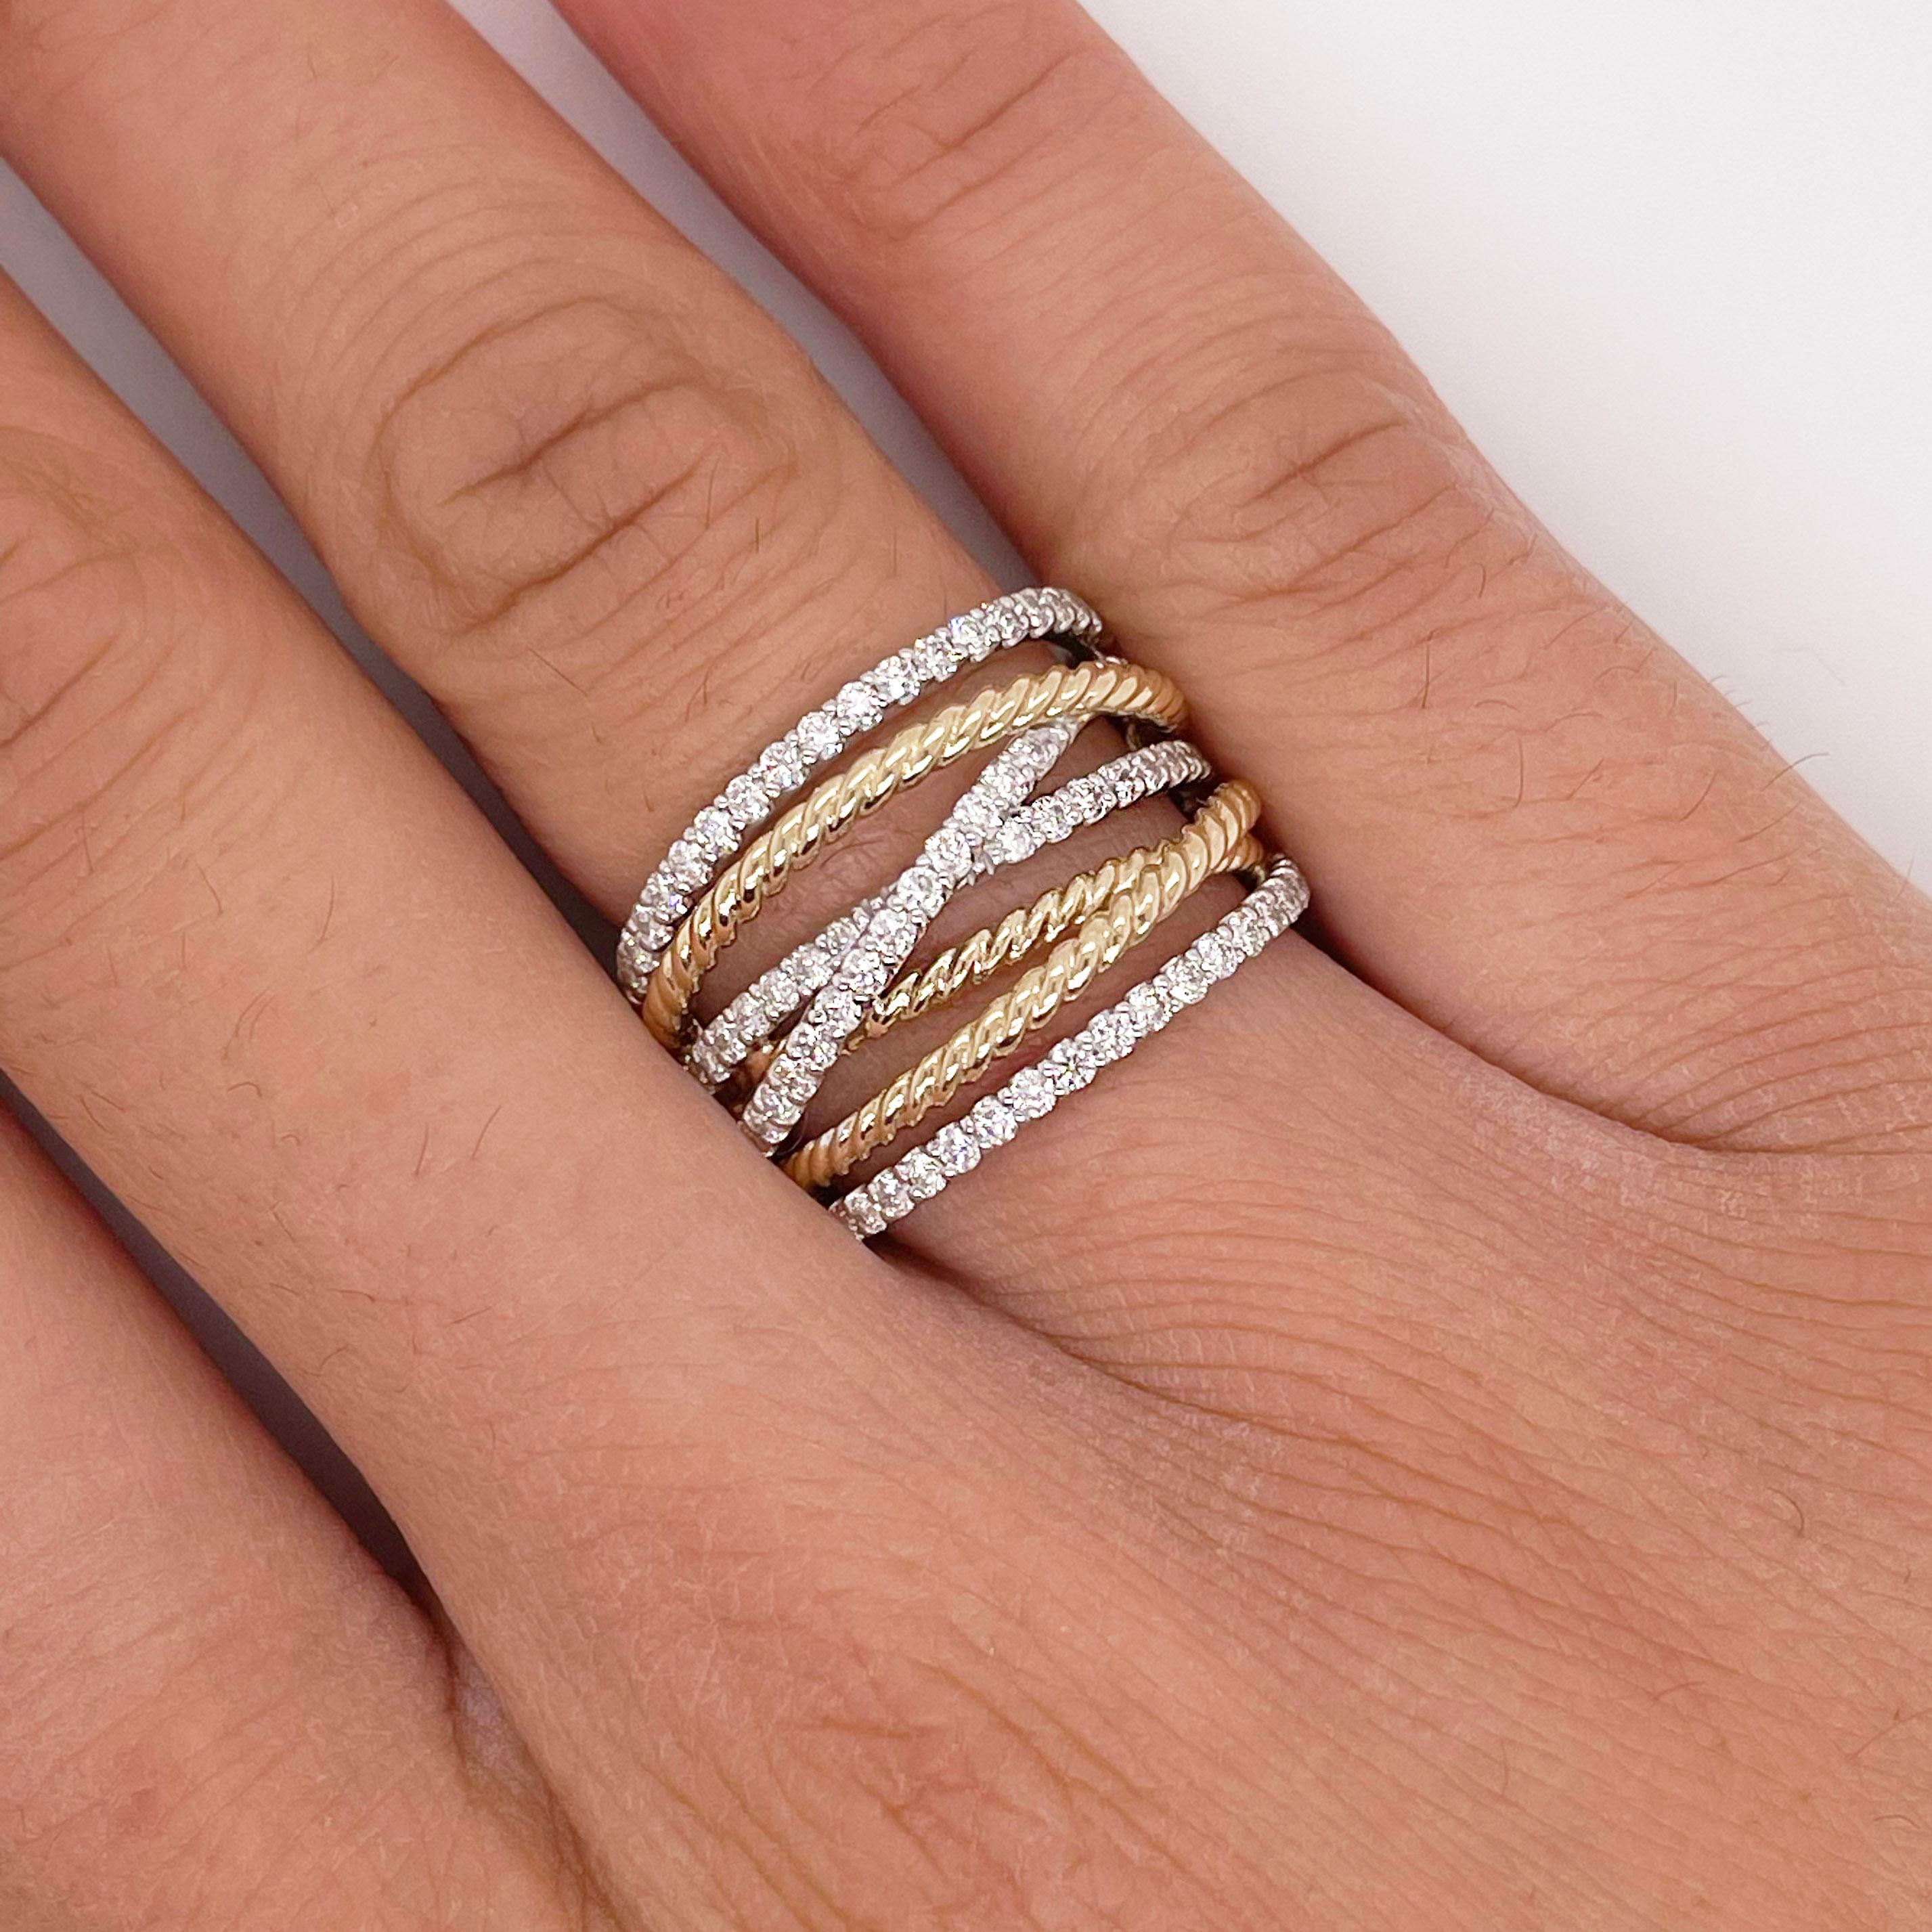 For Sale:  Twisted Rope Ring w Diamond Multi Row Band in 14K Mixed Metal 76 Diamonds 4